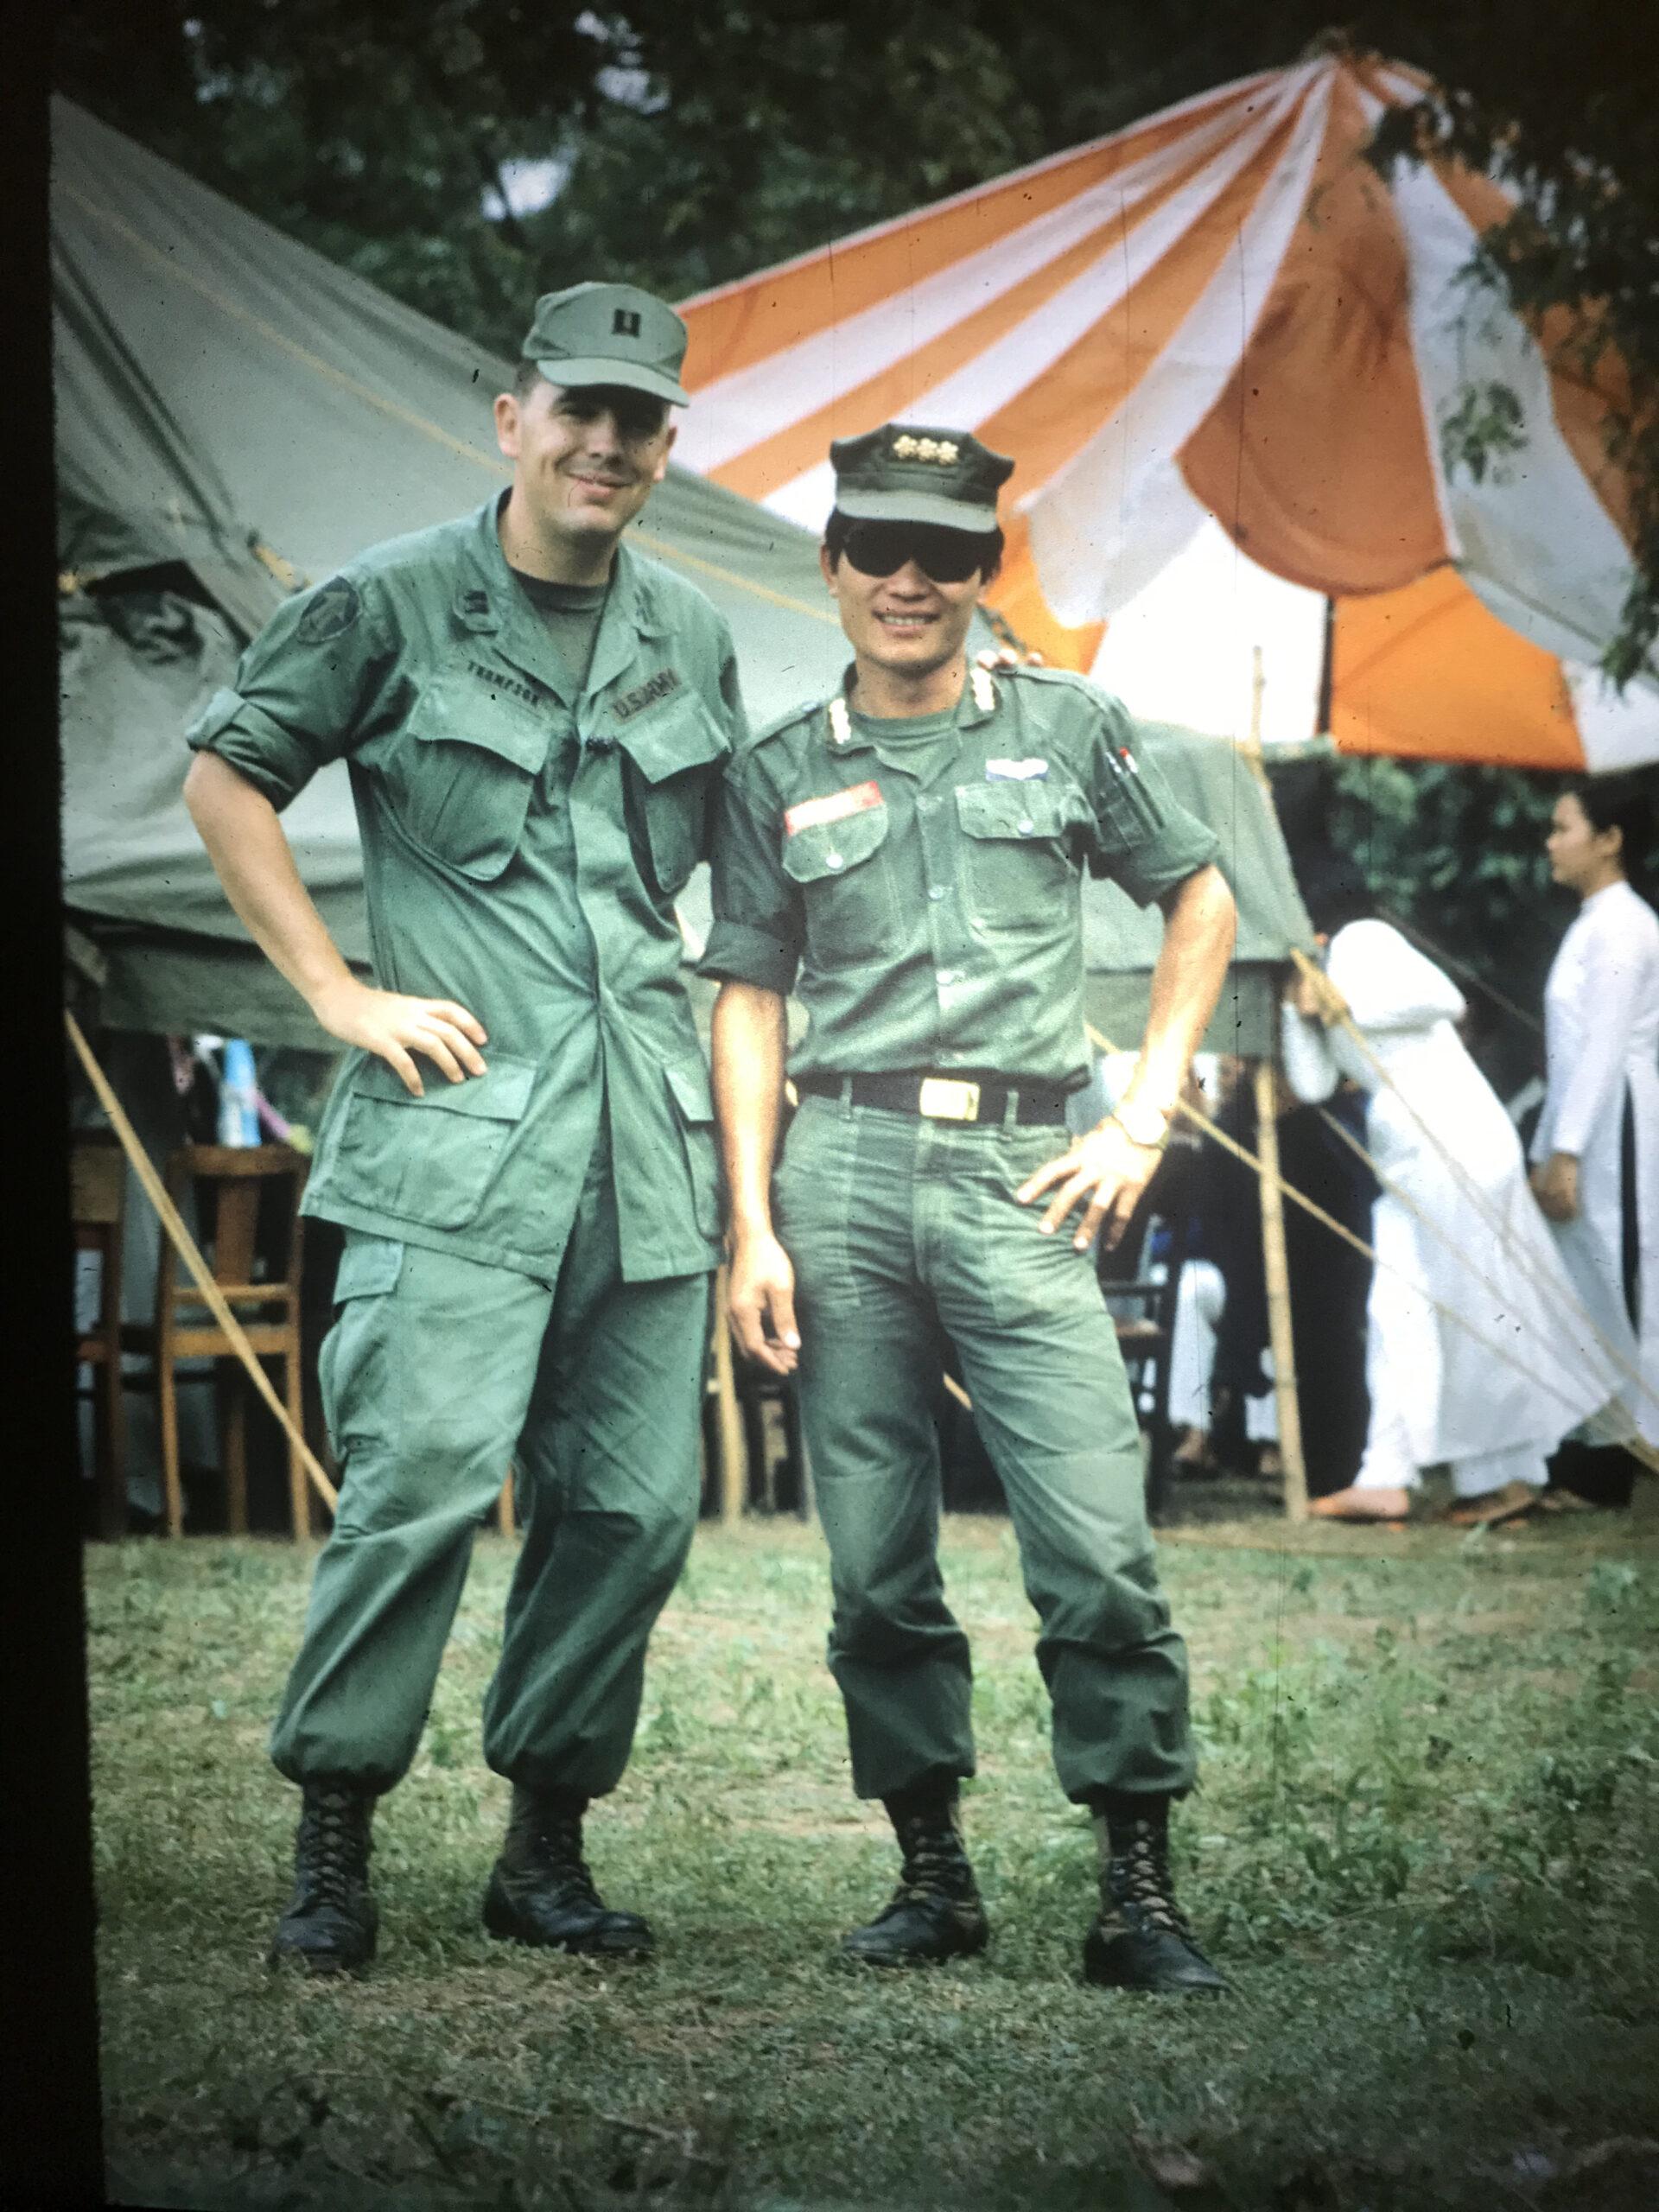 U.S. Army and South Vietnamese Army Officers in uniform in 1970